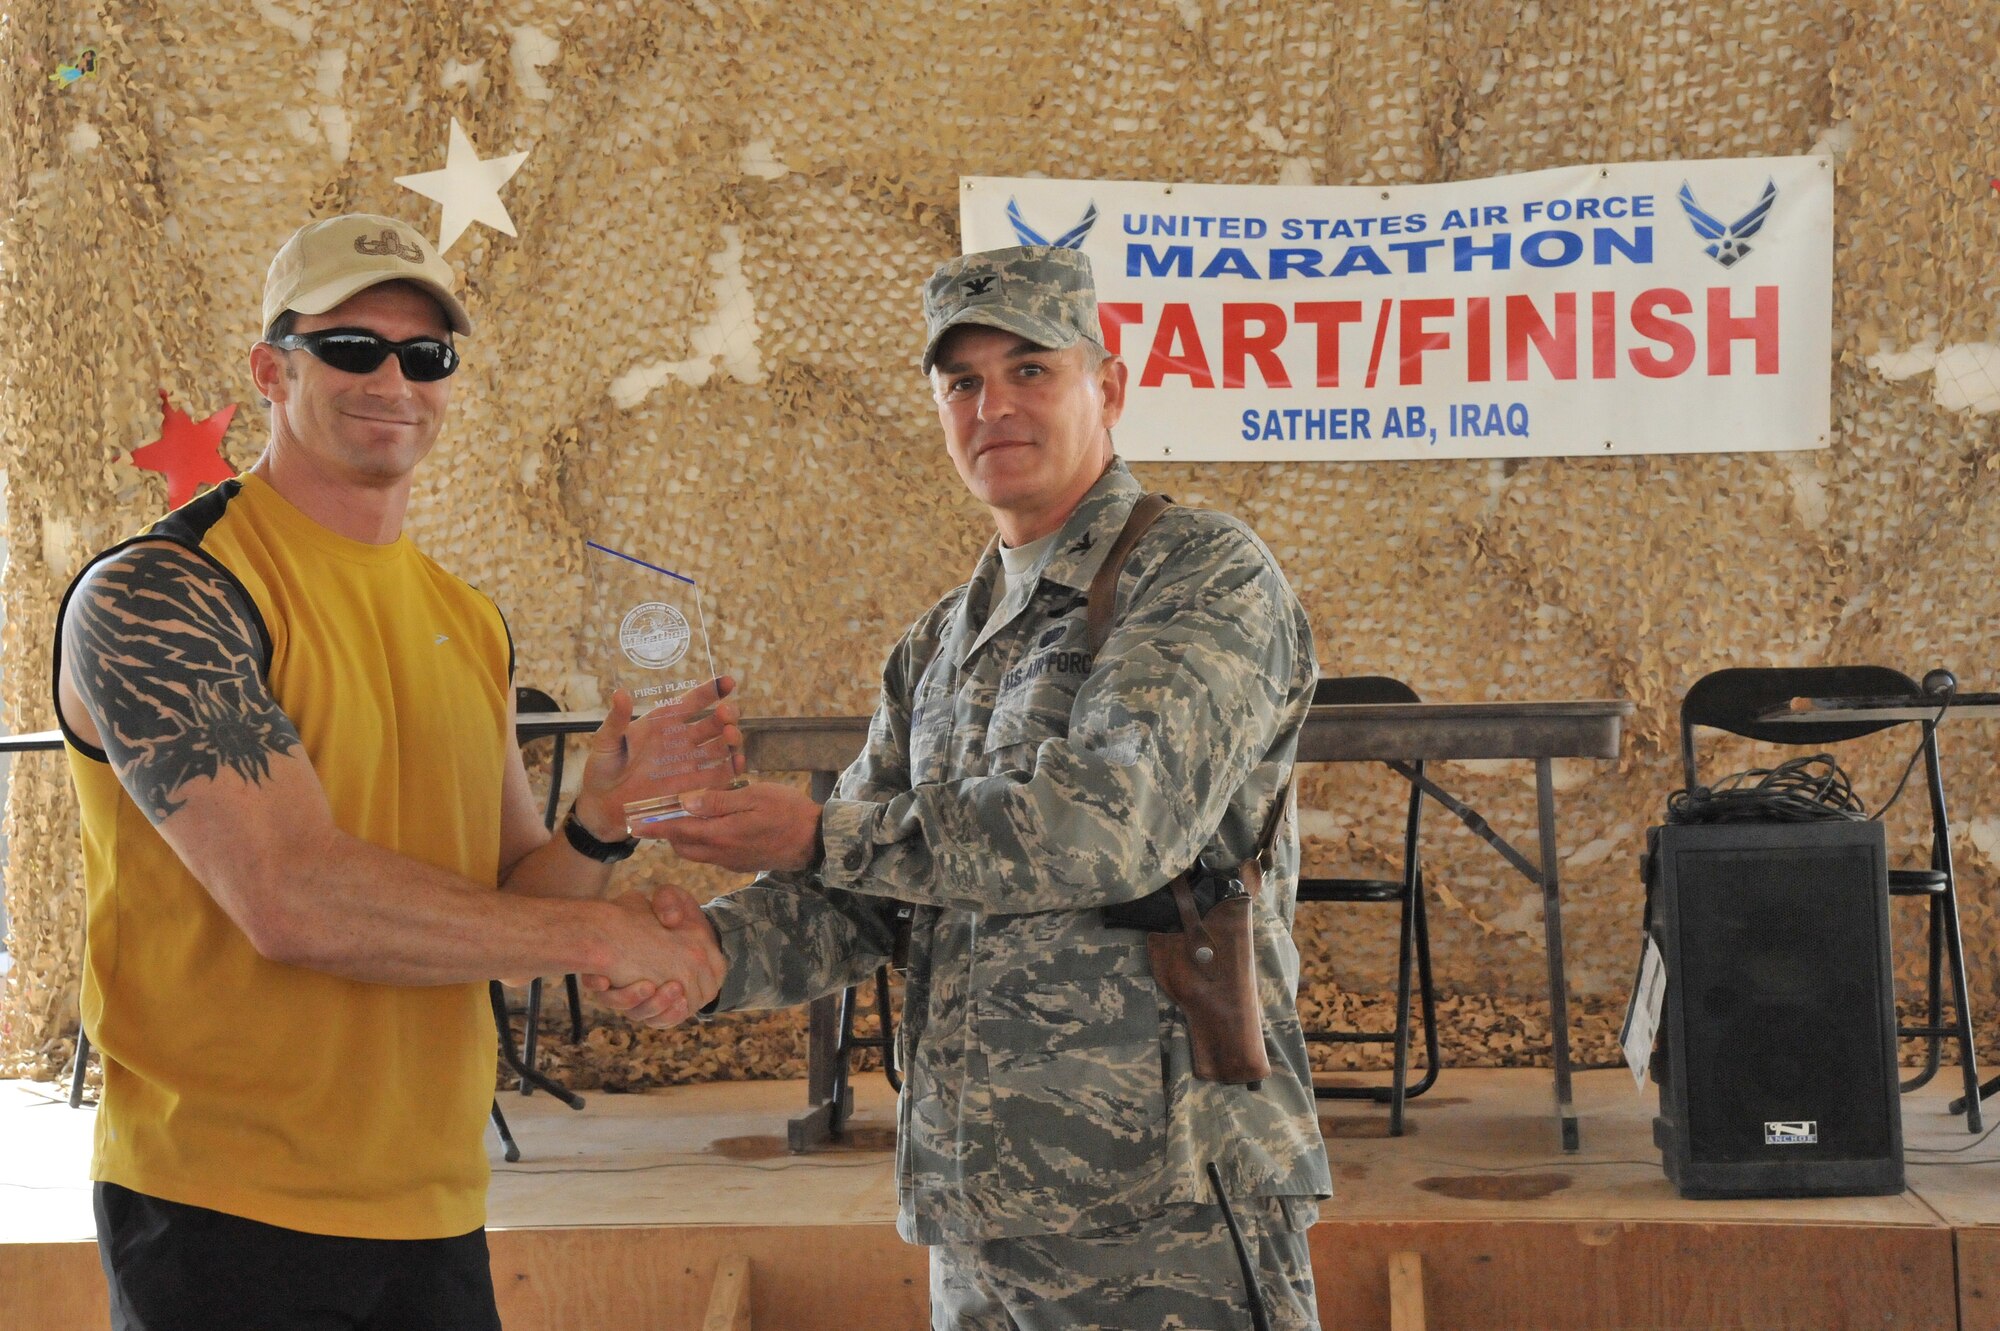 SATHER AIR BASE, Iraq -- Col. Pat Savoy, 447th Air Expeditionary Group commander, presents a first place Sather Air Force Marathon trophy to Navy Lt. j.g. Saulomon King, an explosive ordnance and disposal officer here on the Victory Base Complex.  The Lovelock, Nev. native ran the males 10-kilometer marathon in 43 minutes, 48 seconds.  (U.S. Air Force photo/Staff Sgt. Misty D. Slater)